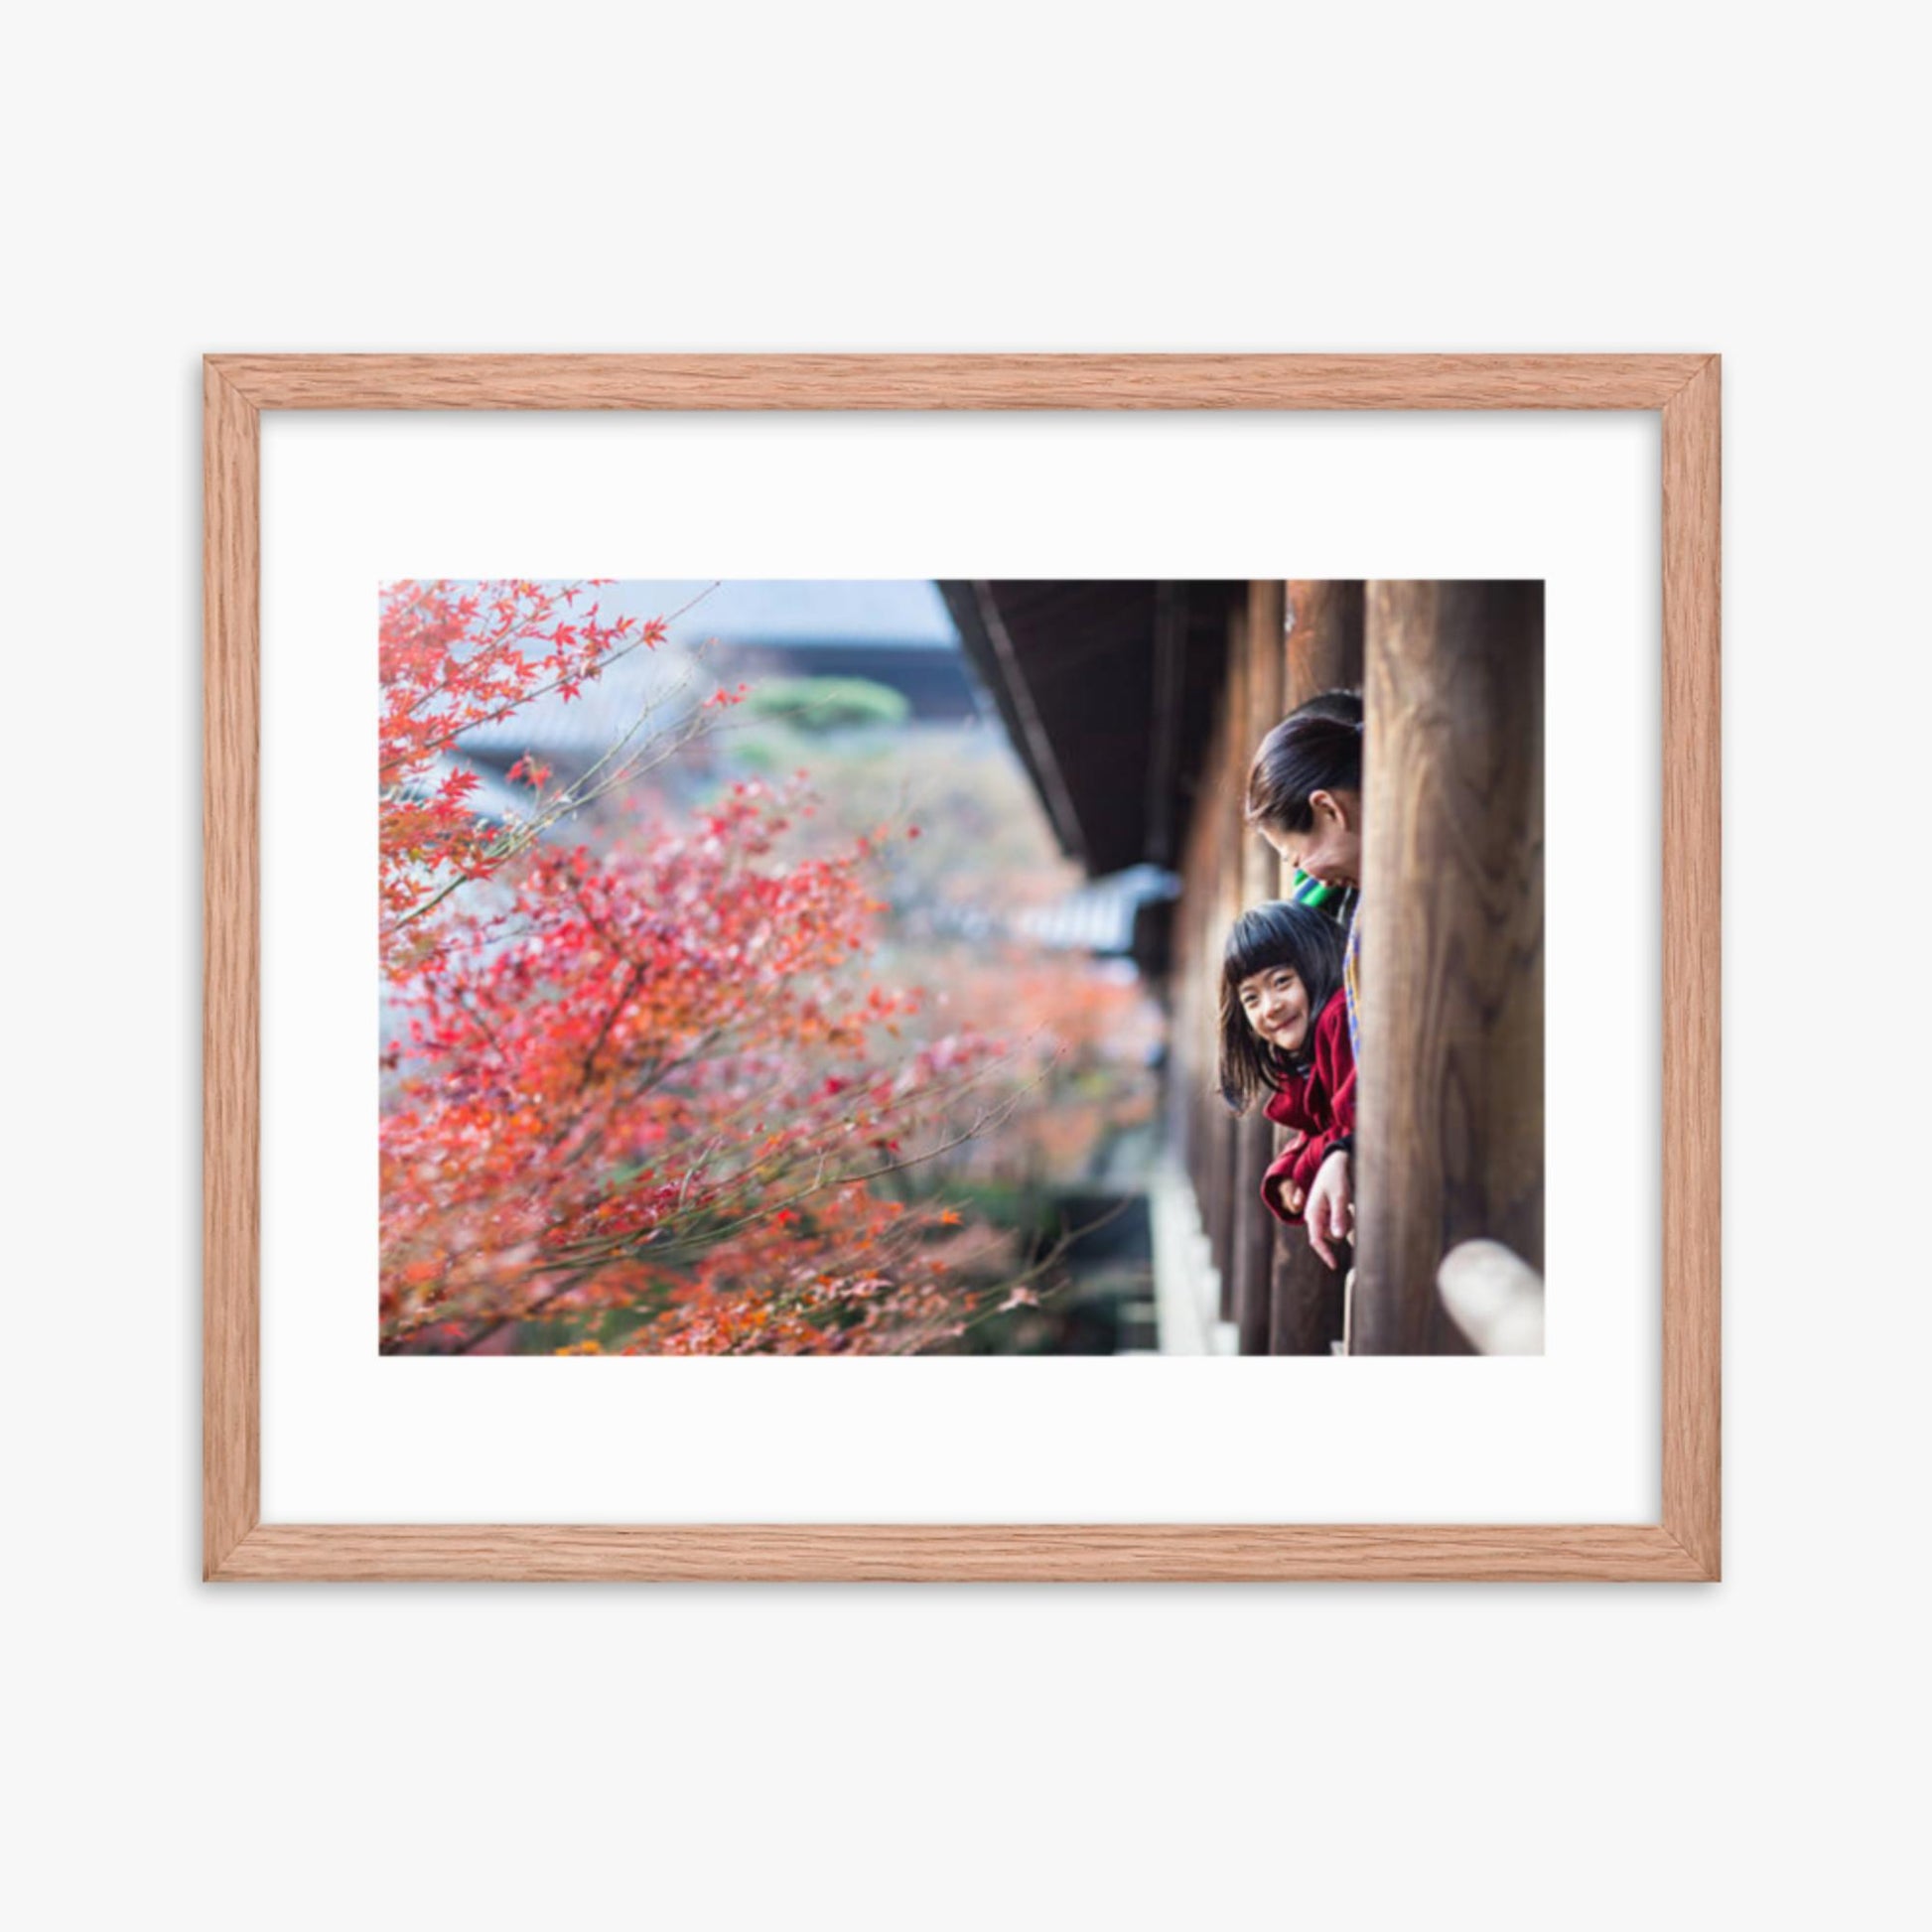 Father, mother and daughter at a temple enjoying autumn leaves 16x20 in Poster With Oak Frame